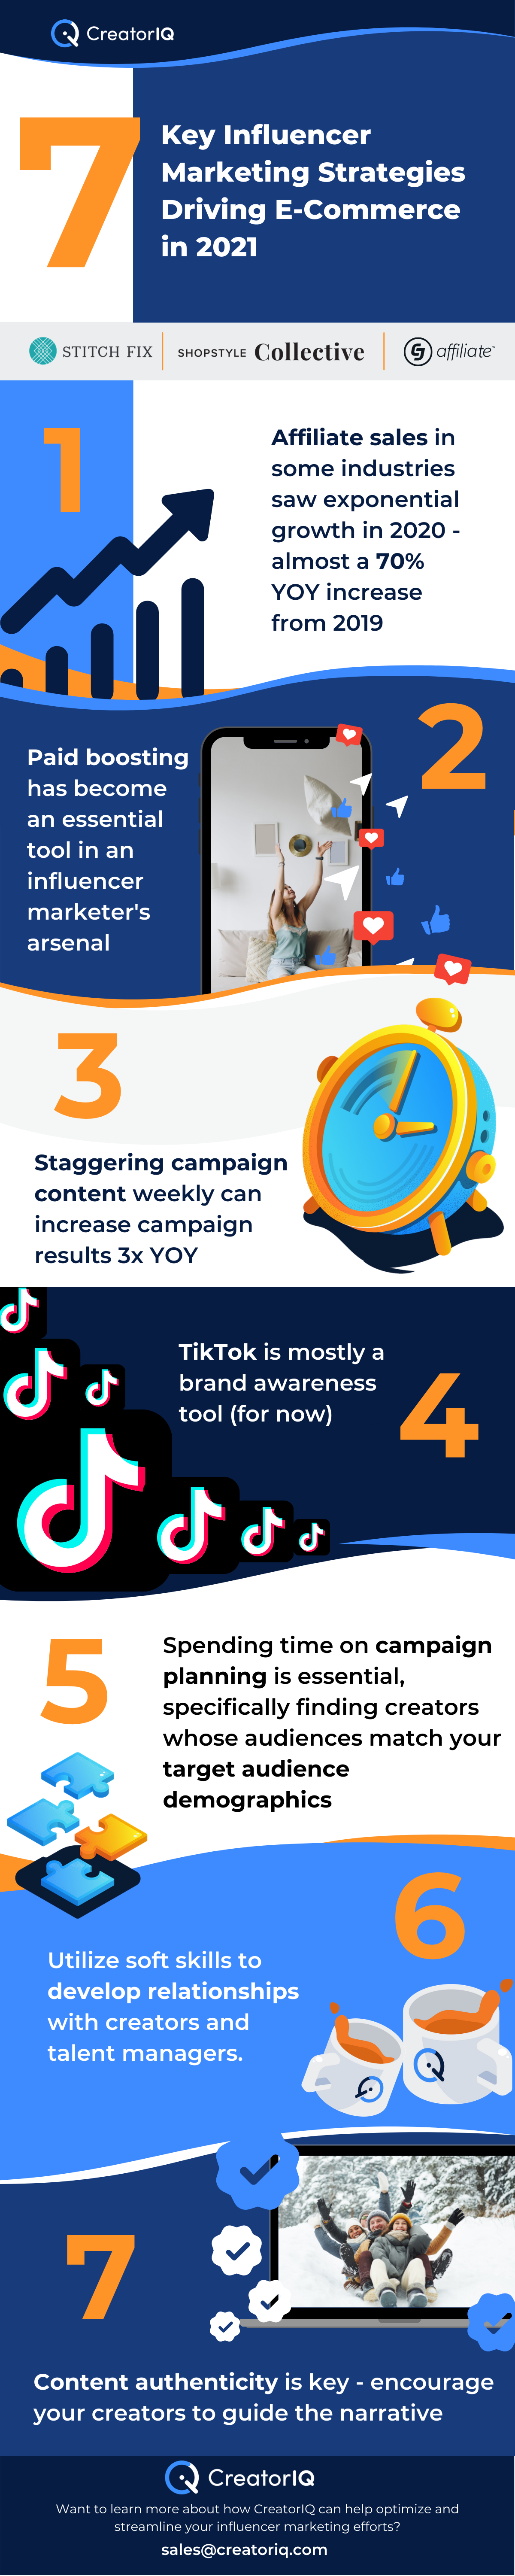 [Infographic + Video] Virtual Views: Key Trends Impacting Influencer Marketing Between Now and 2025
